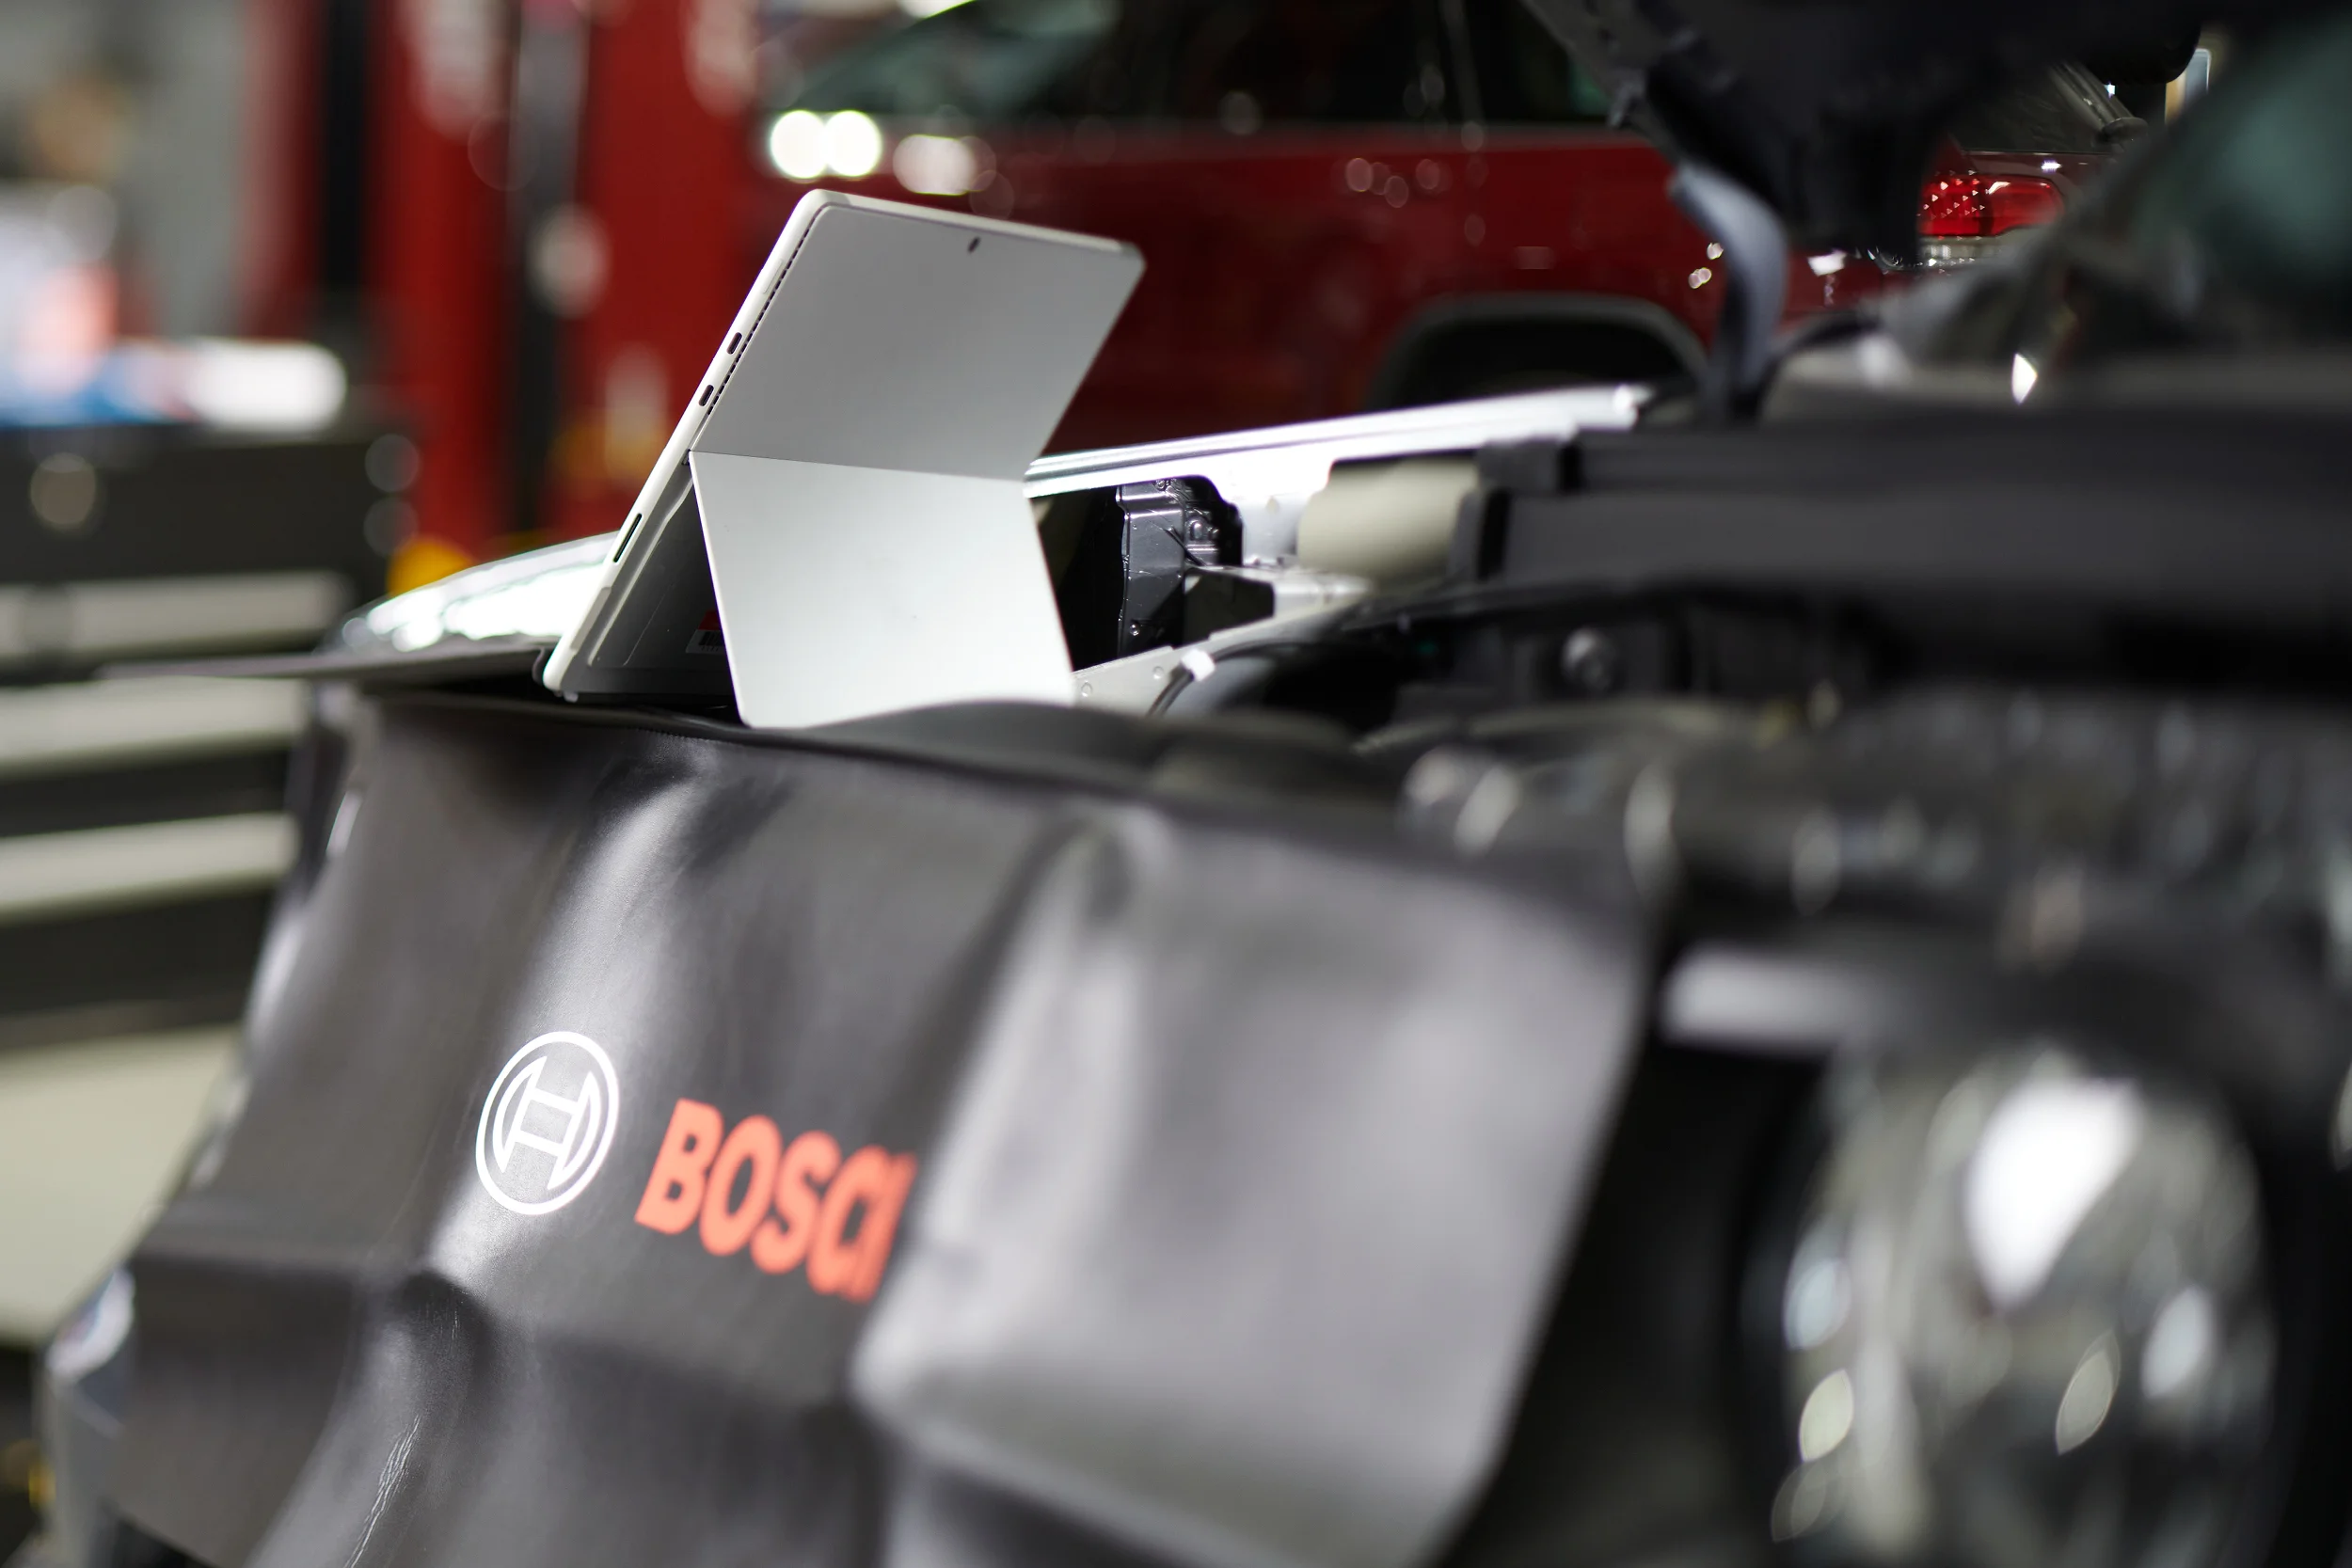 Bosch Auto Service provides excellent auto repairs and vehicle services to all customers.